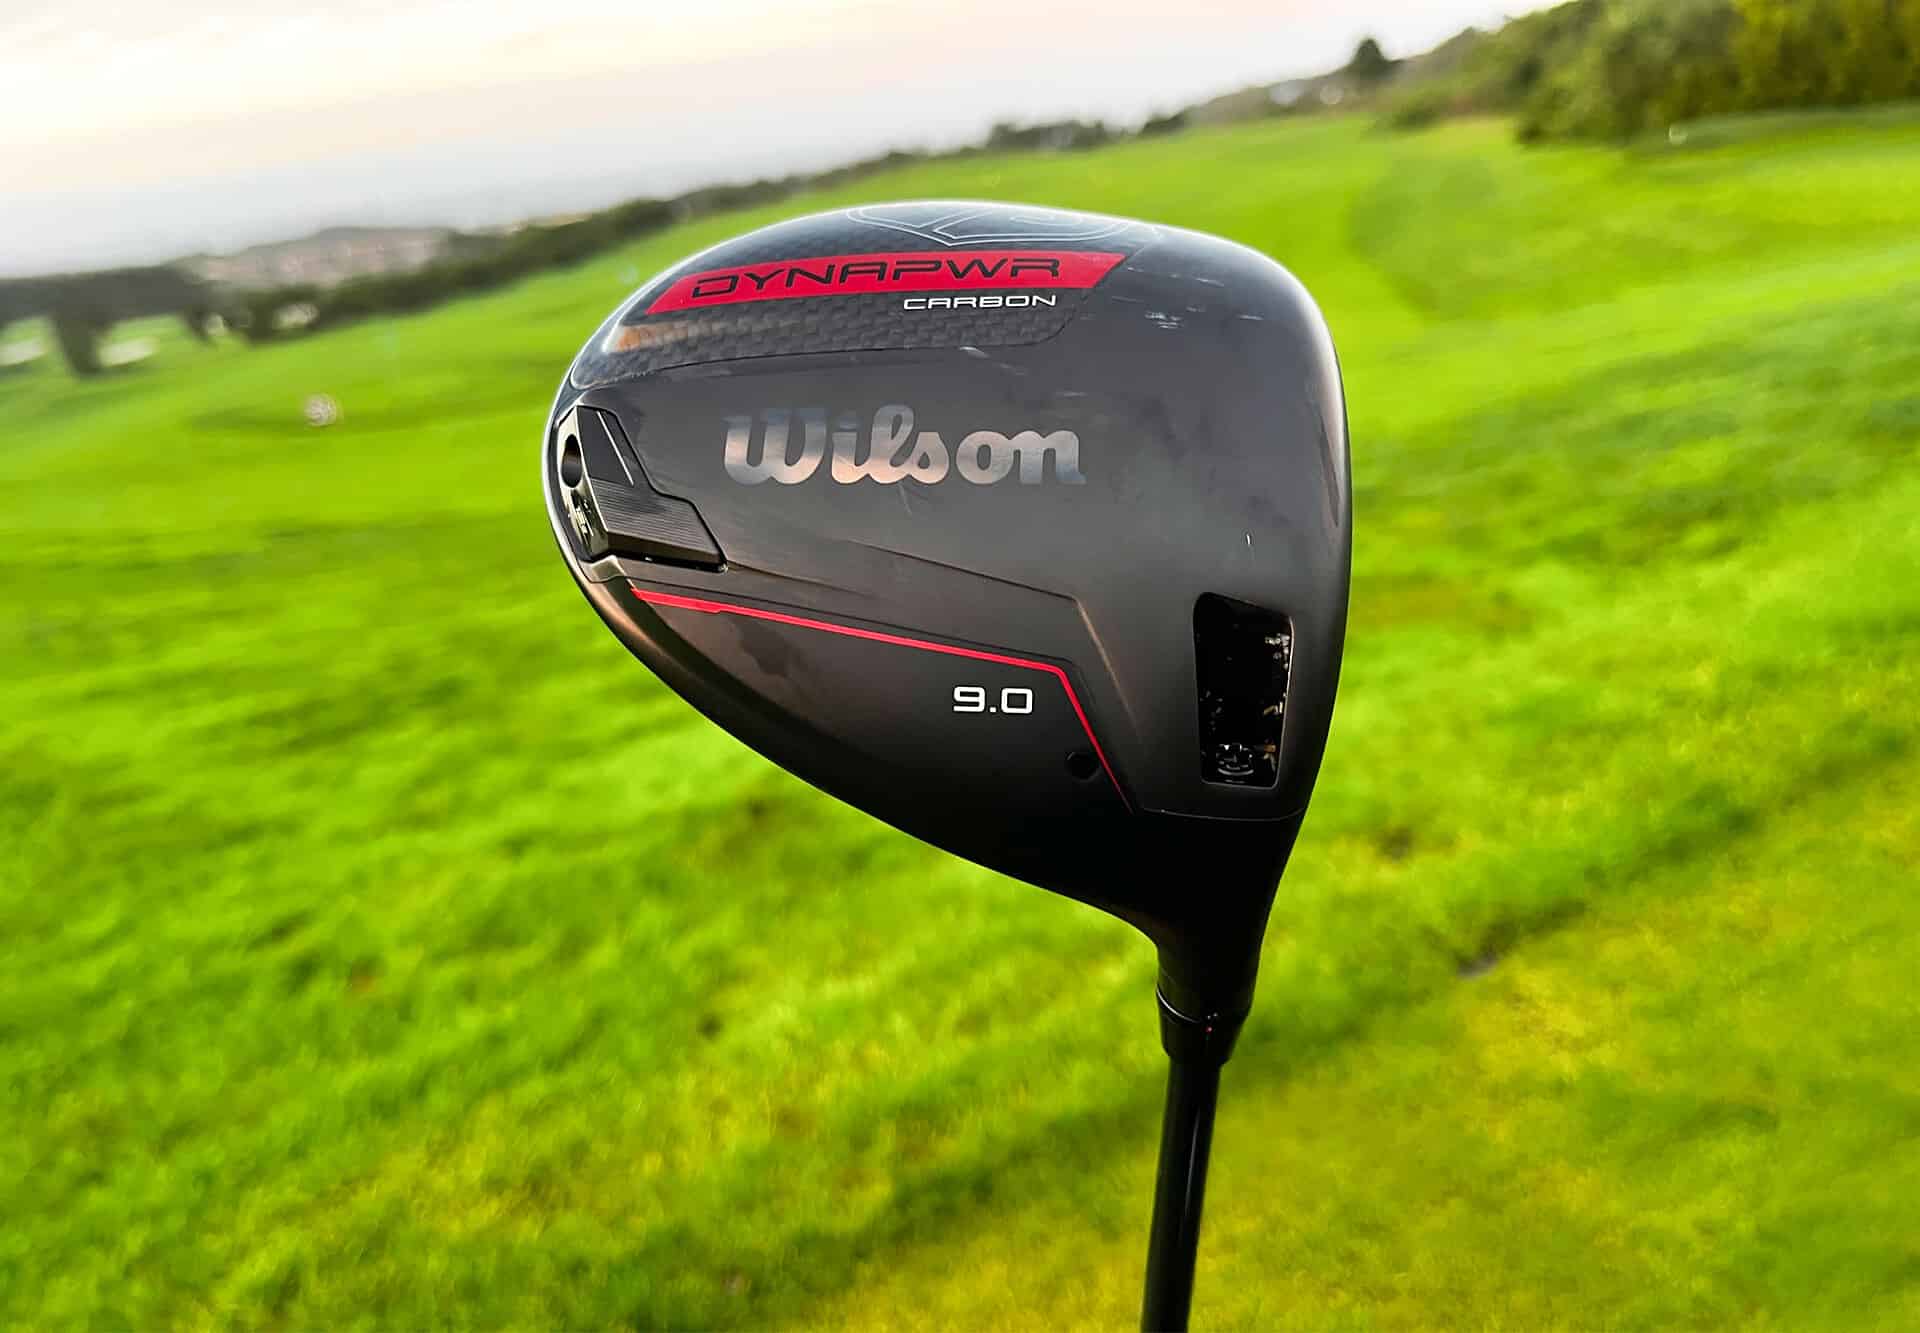 Wilson Dynapwr Carbon driver